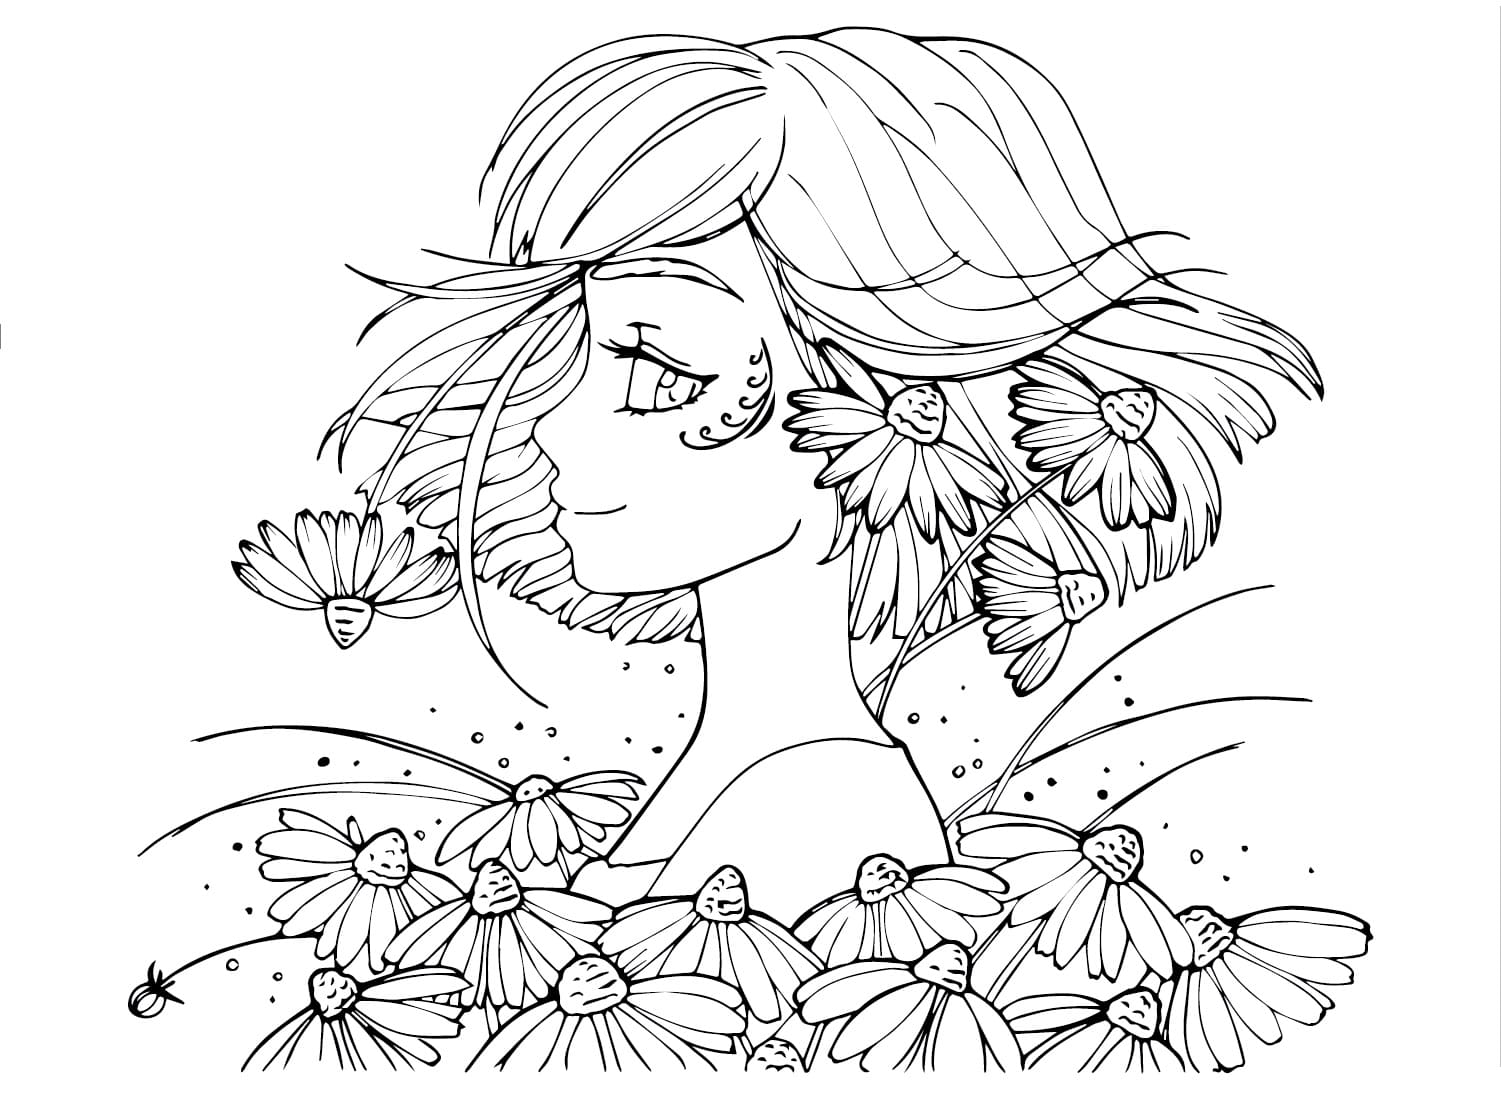 Belle Fille Ado coloring page